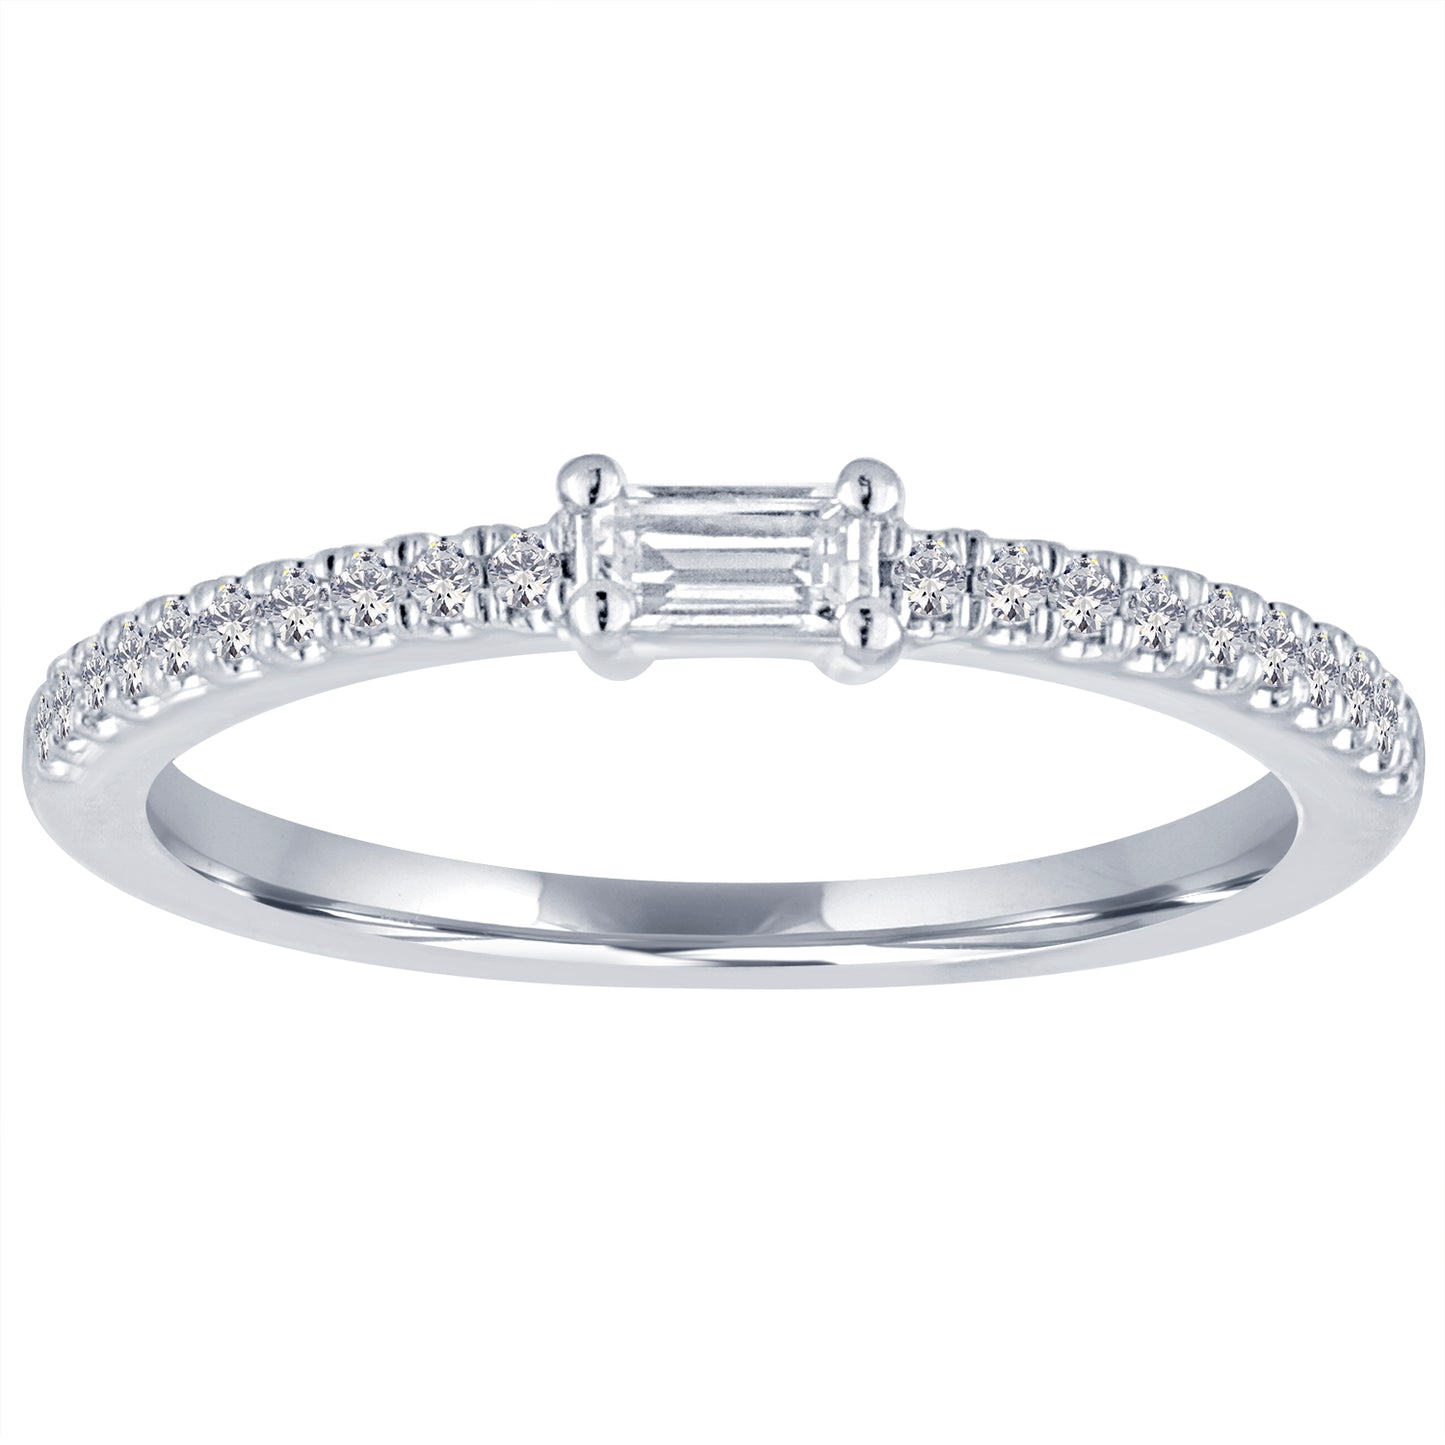 White gold skinny band with a diamond baguette in the center and round diamonds on the shank.